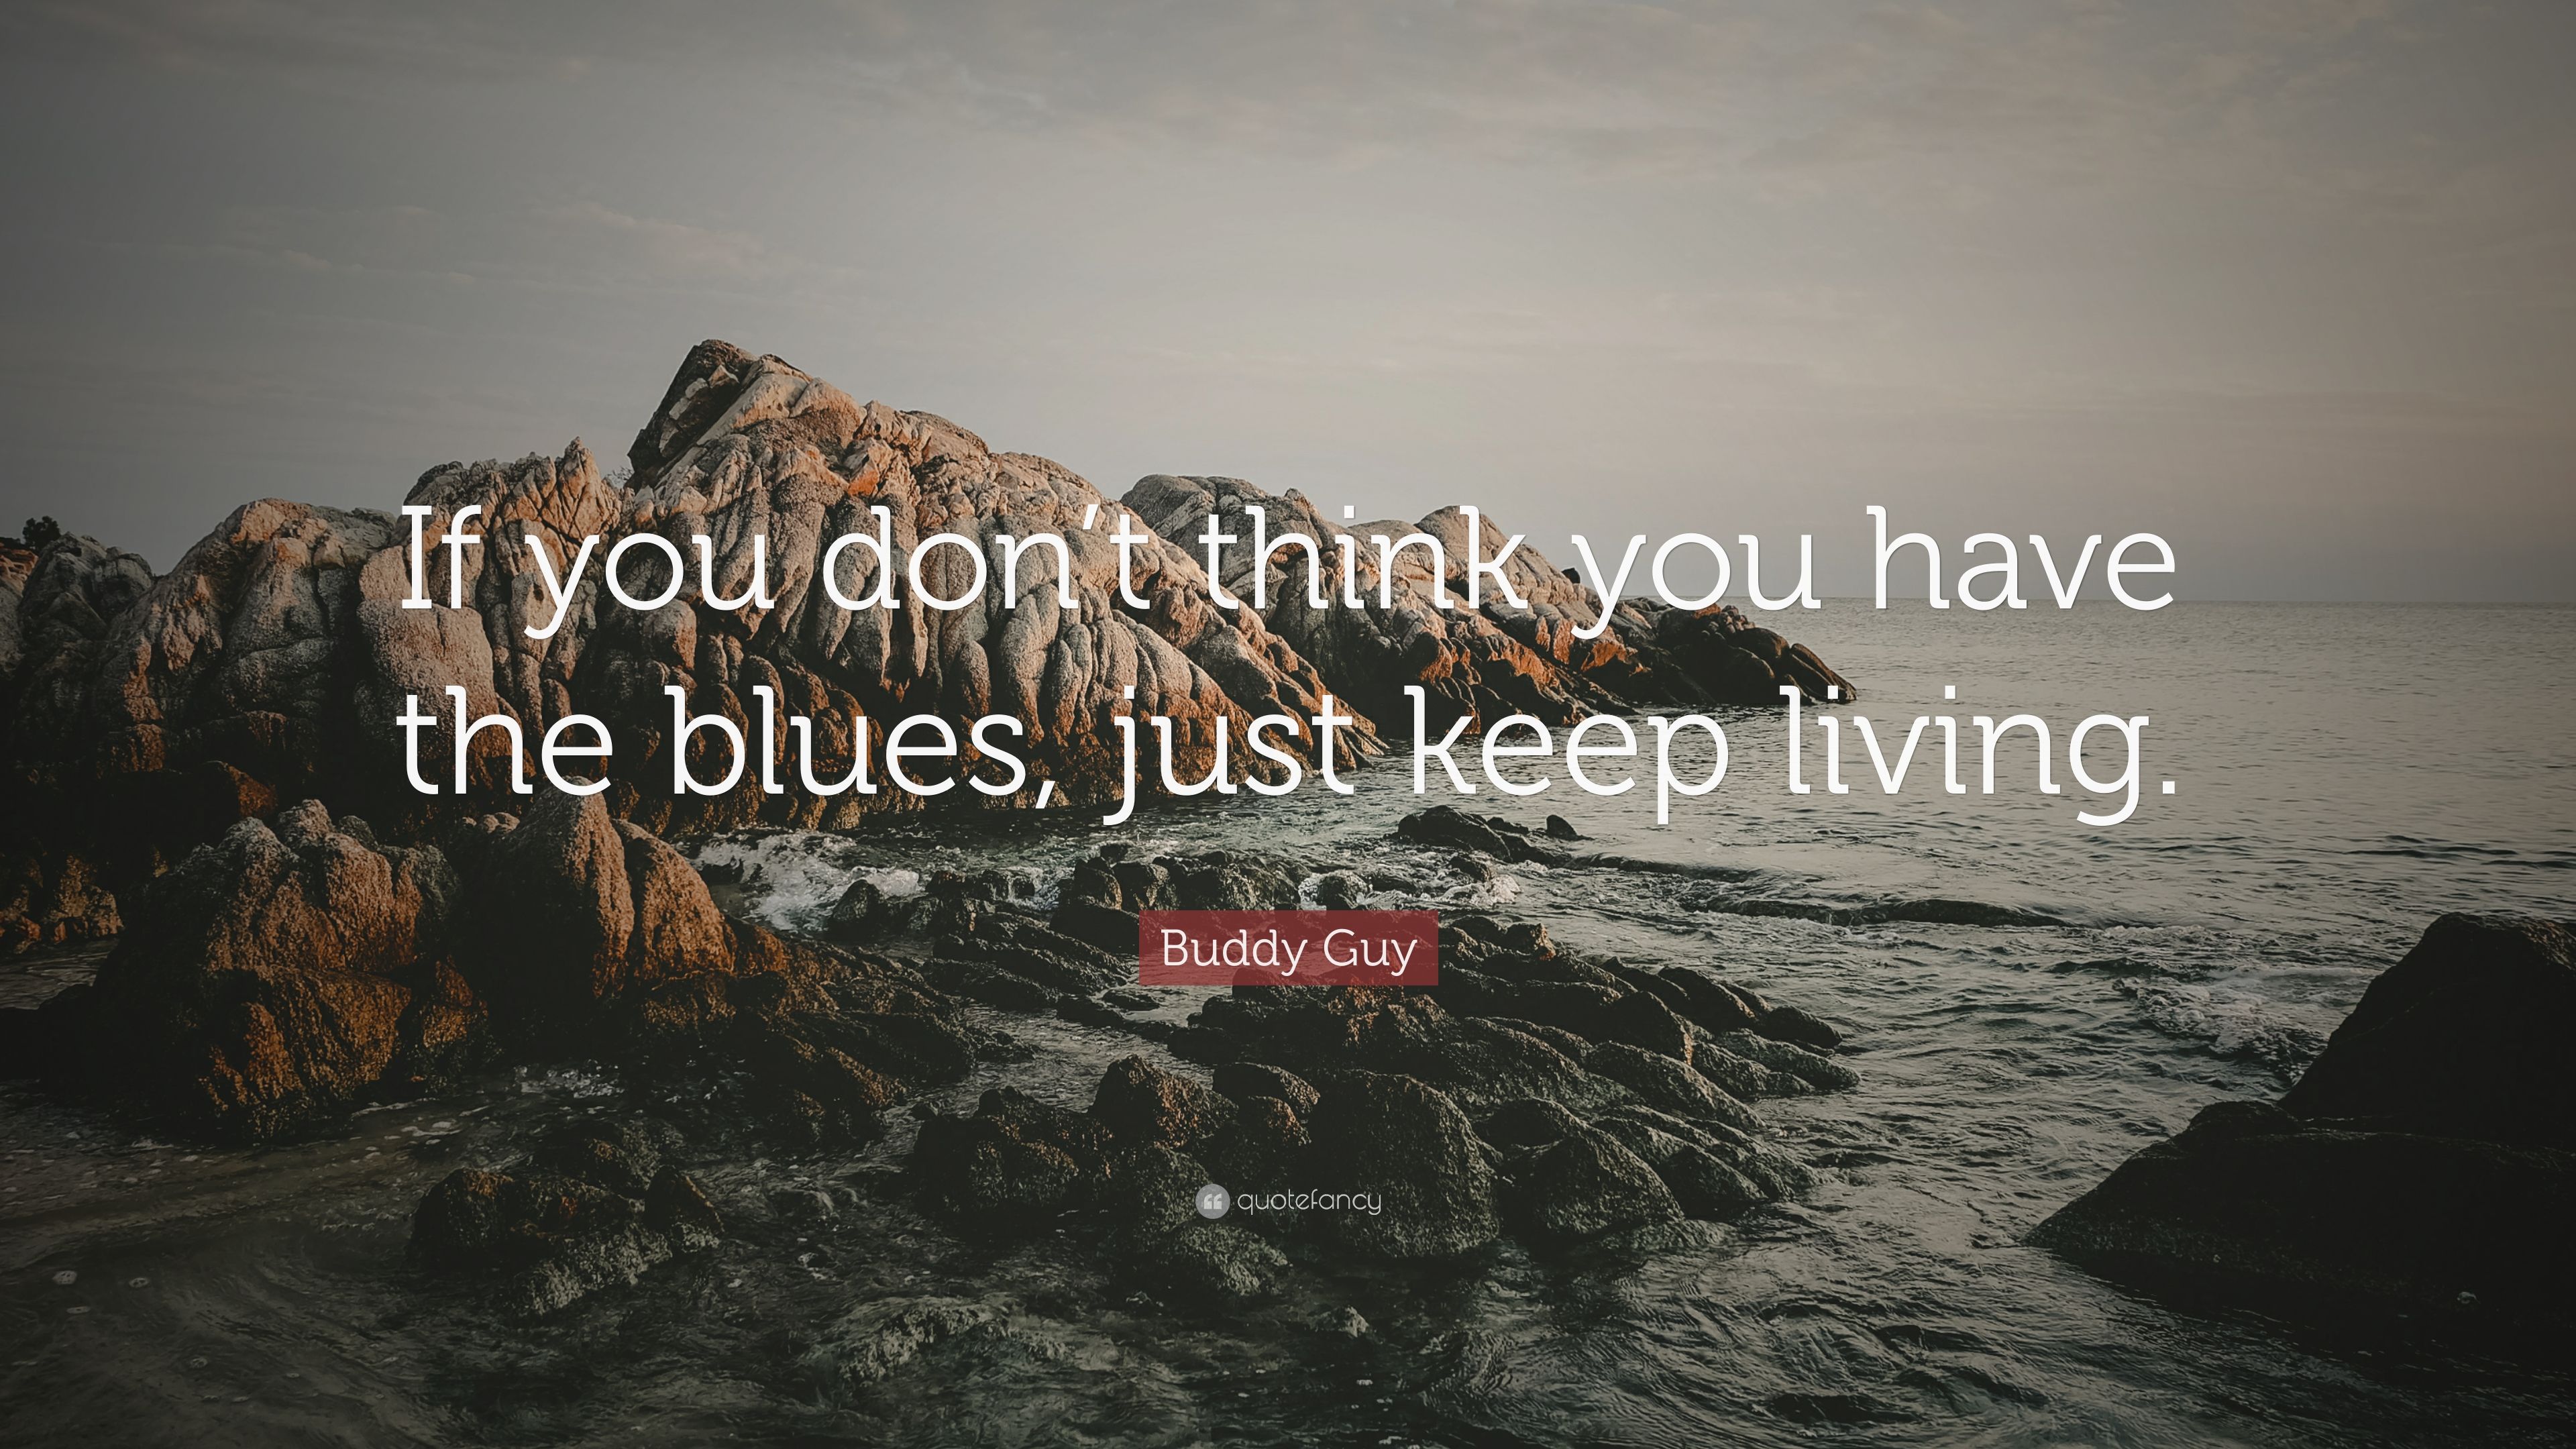 Buddy Guy Quote: “If you don't think you have the blues, just keep